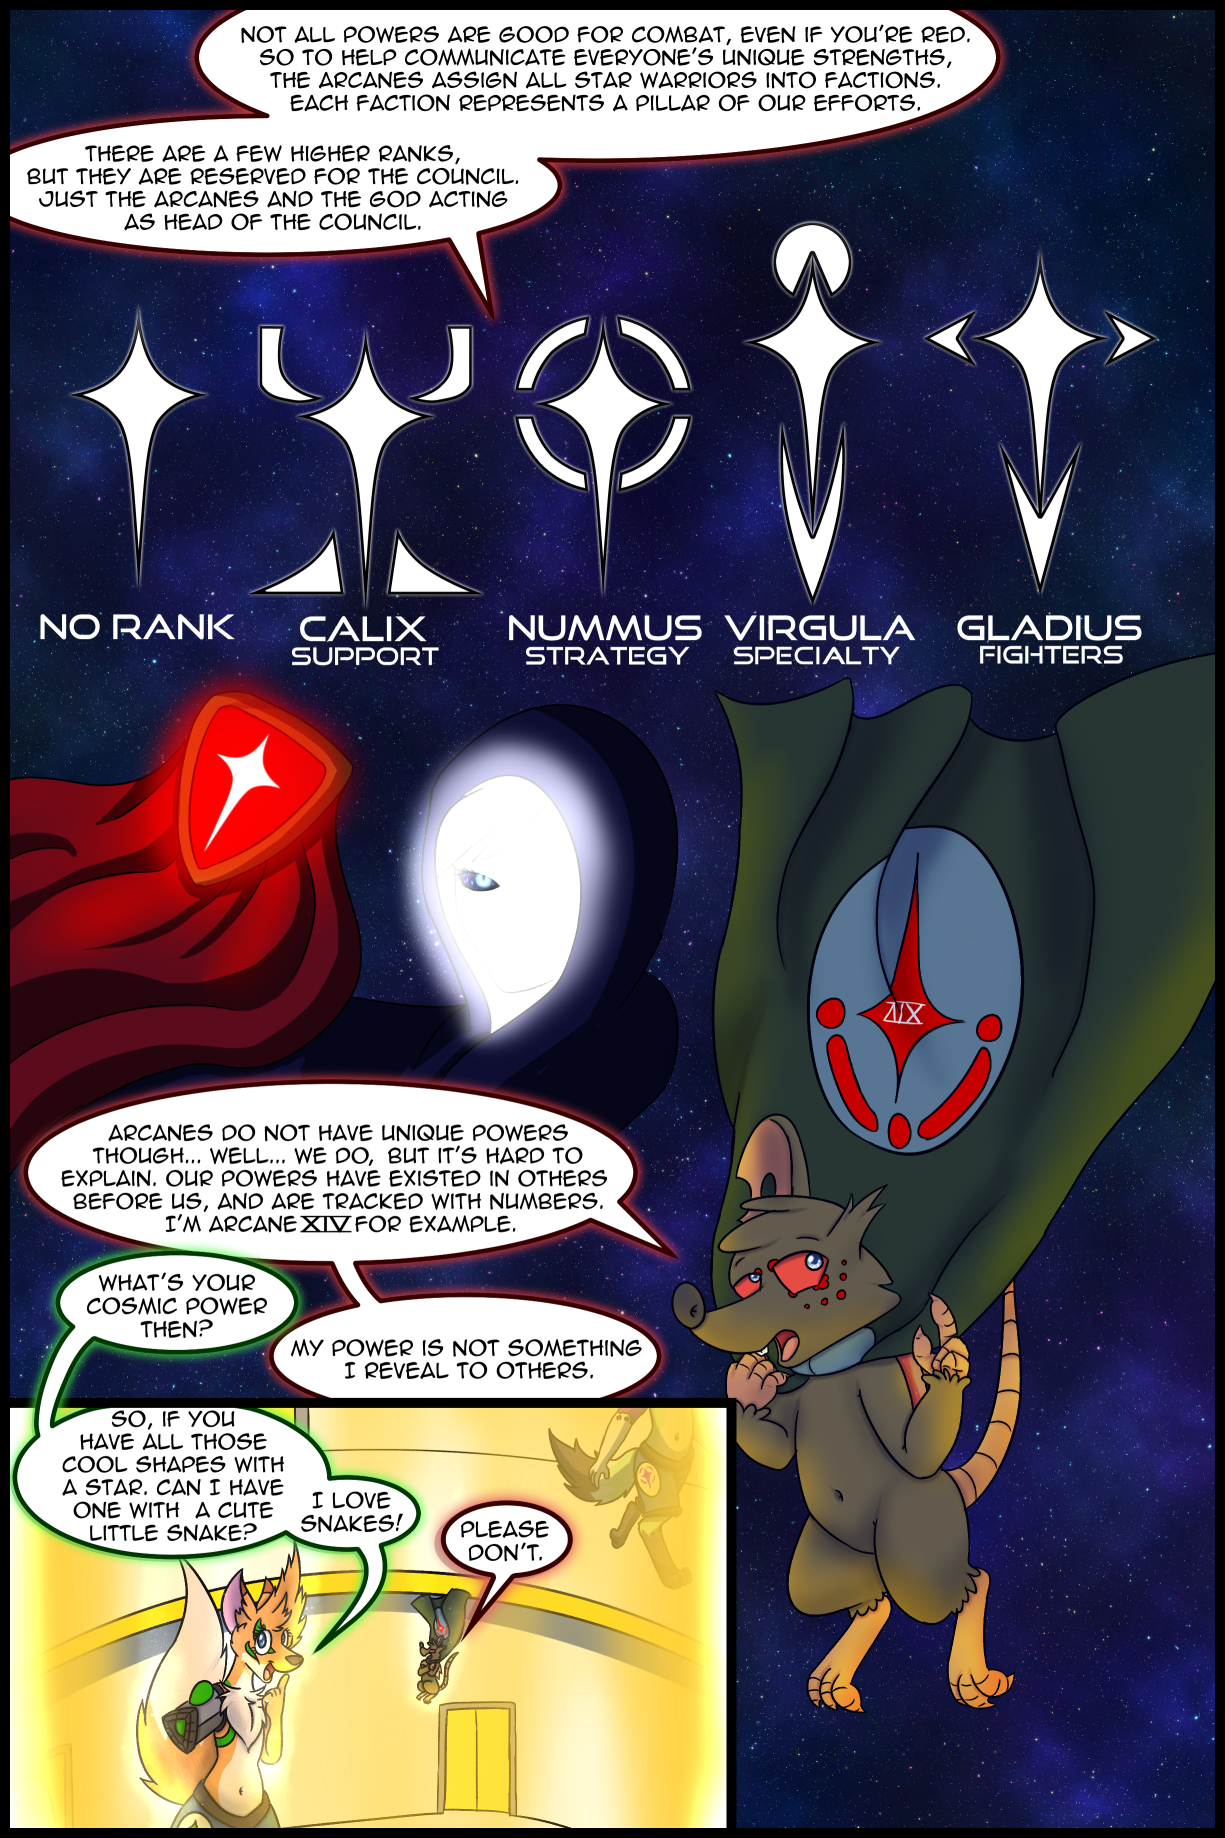 Ch4 Page 7 – Ranks